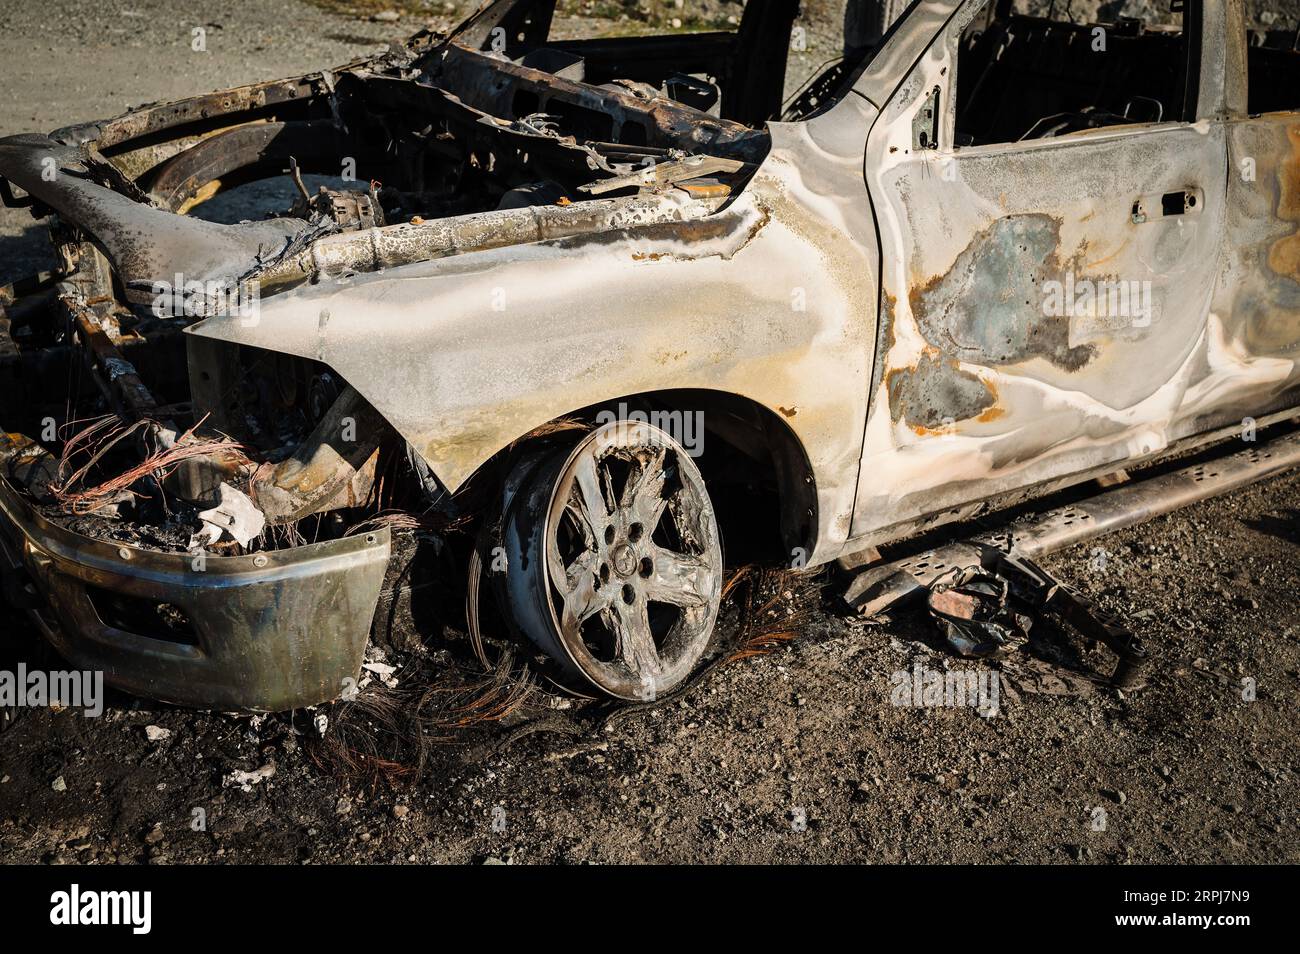 A burned out Dodge pick up truck lies abandoned beside a gravel road in rural British Columbia, Canada. Stock Photo